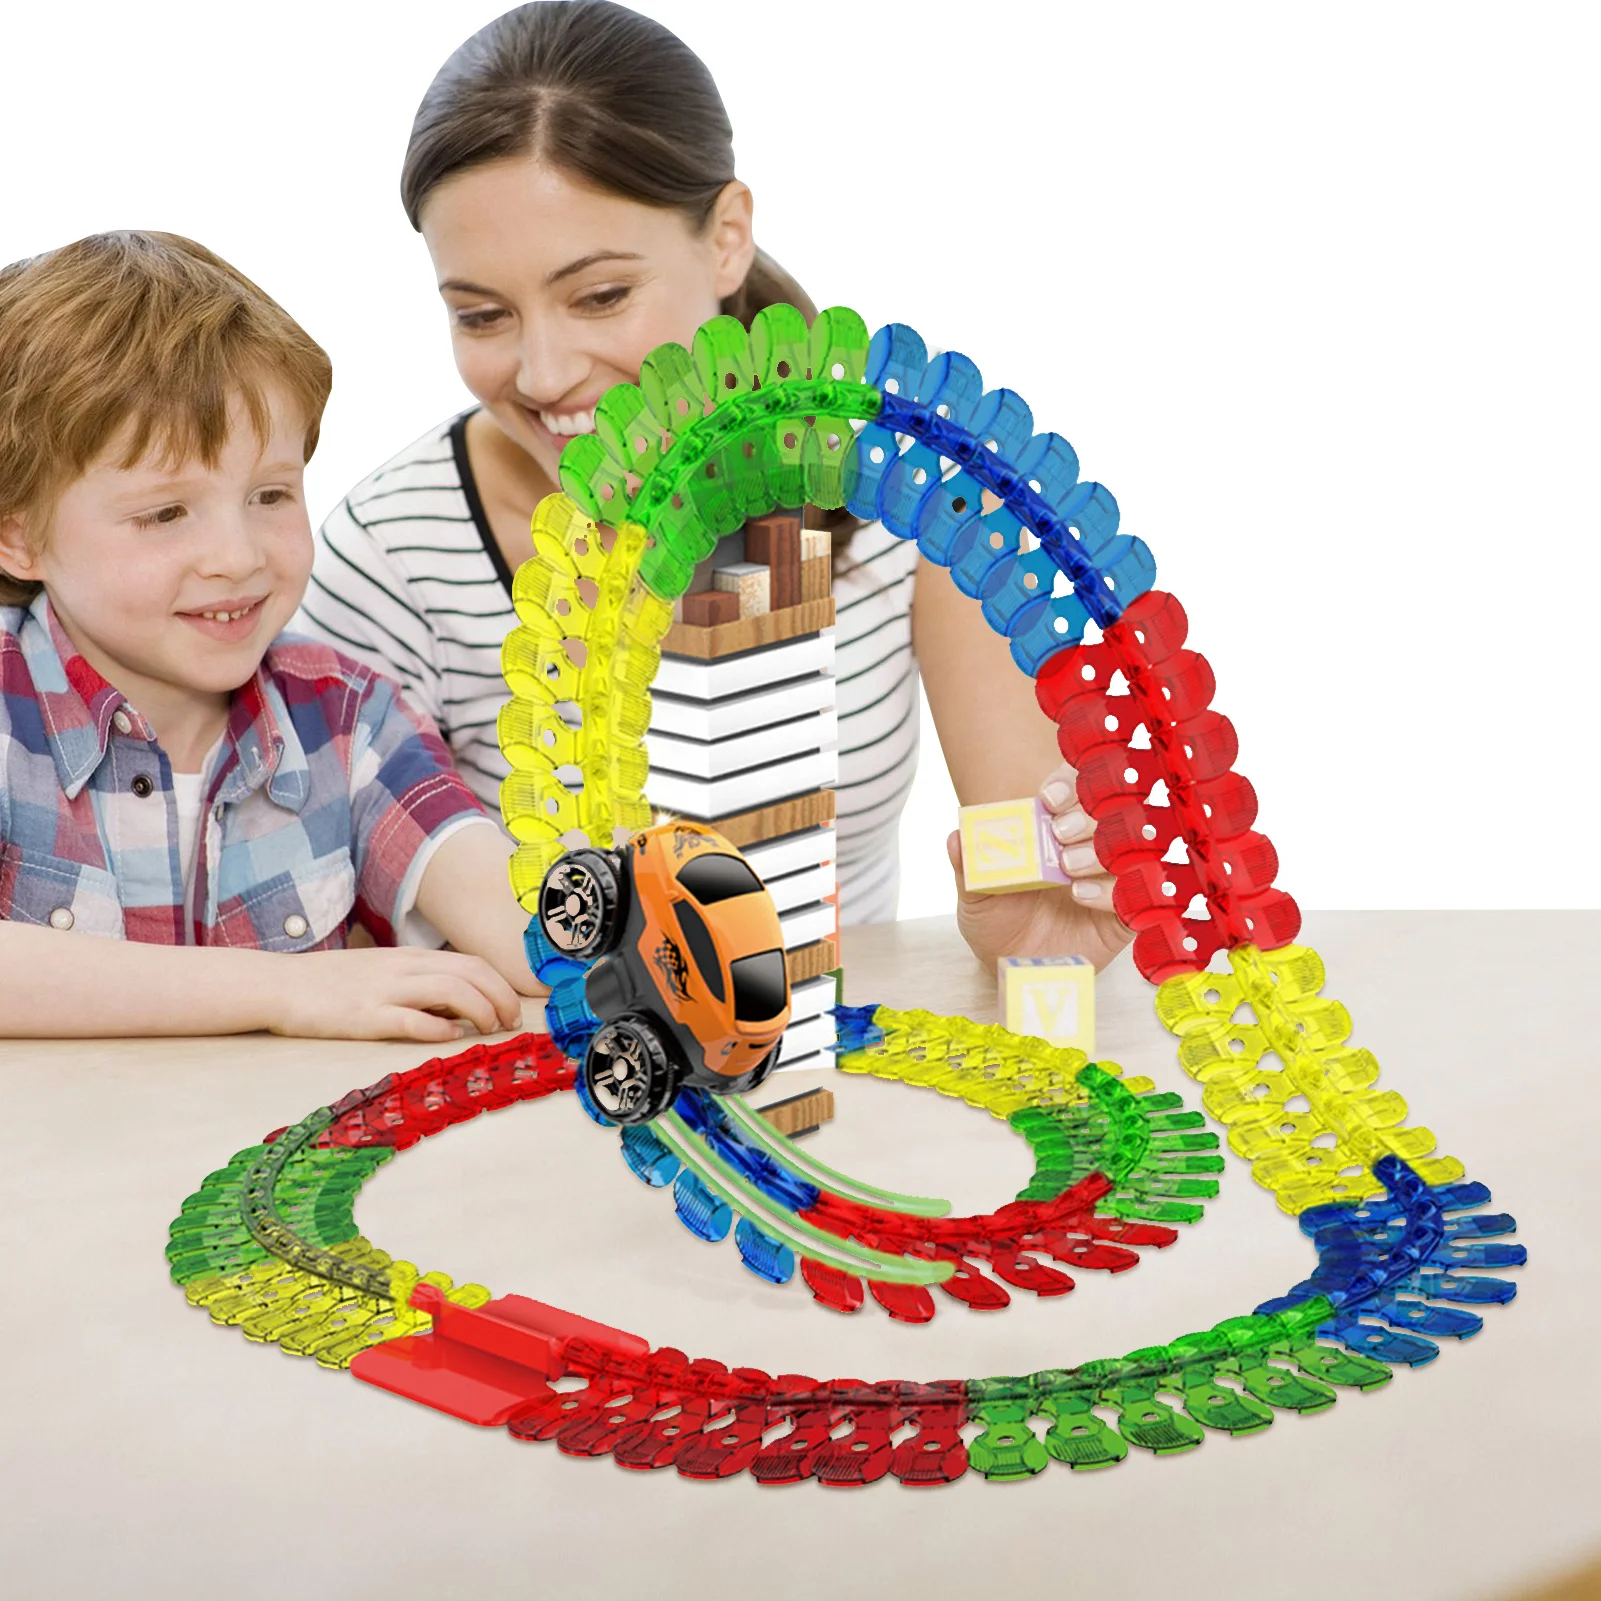 

Rail Car Scene Toy Flexible Track Playset Toy Race Track Set STEM Building Toys For Boys And Girls DIY Racing Tracks Ideal